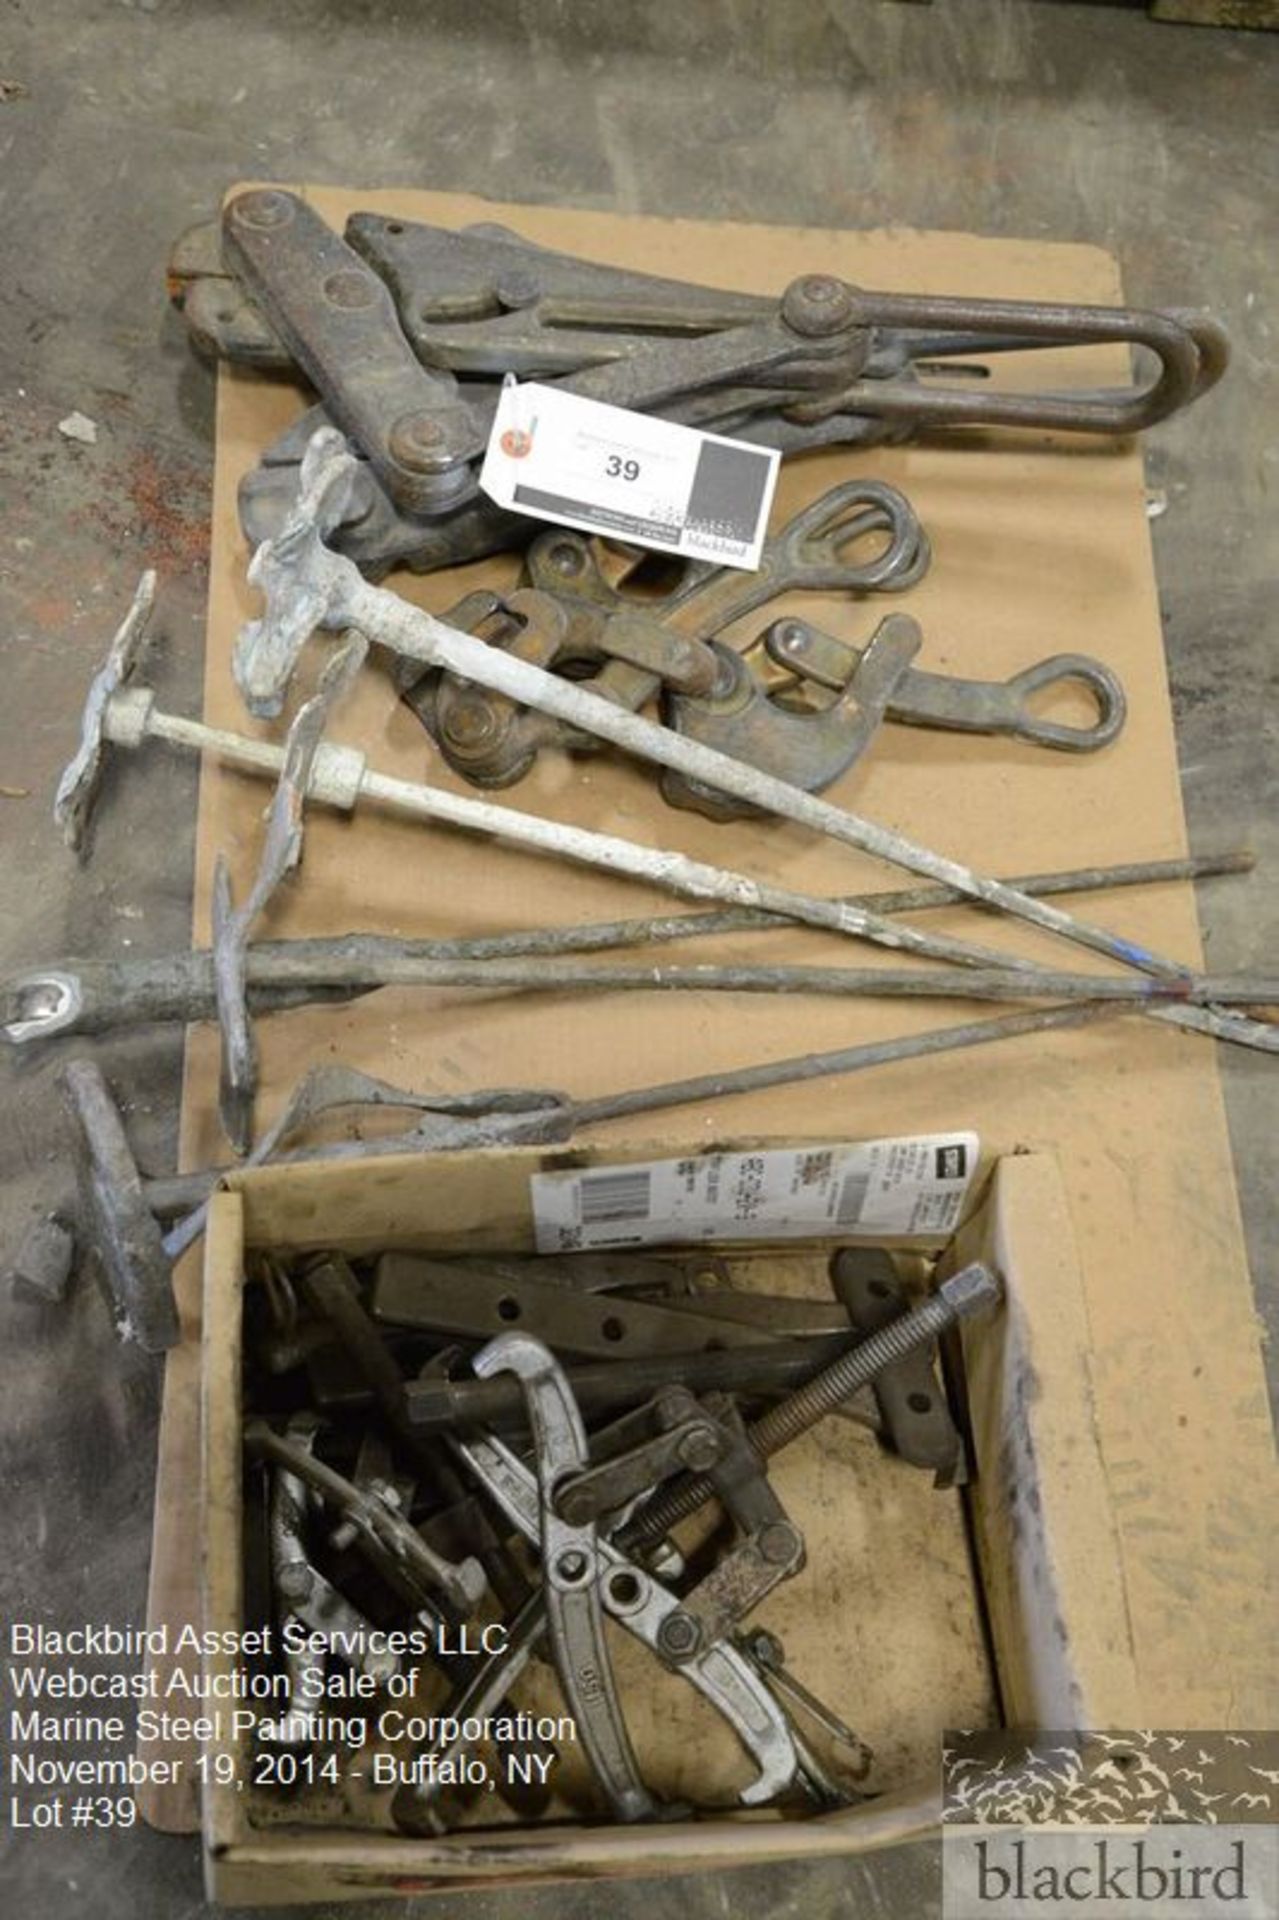 Lot- wheel puller, various size paint mixers, lifting attachments